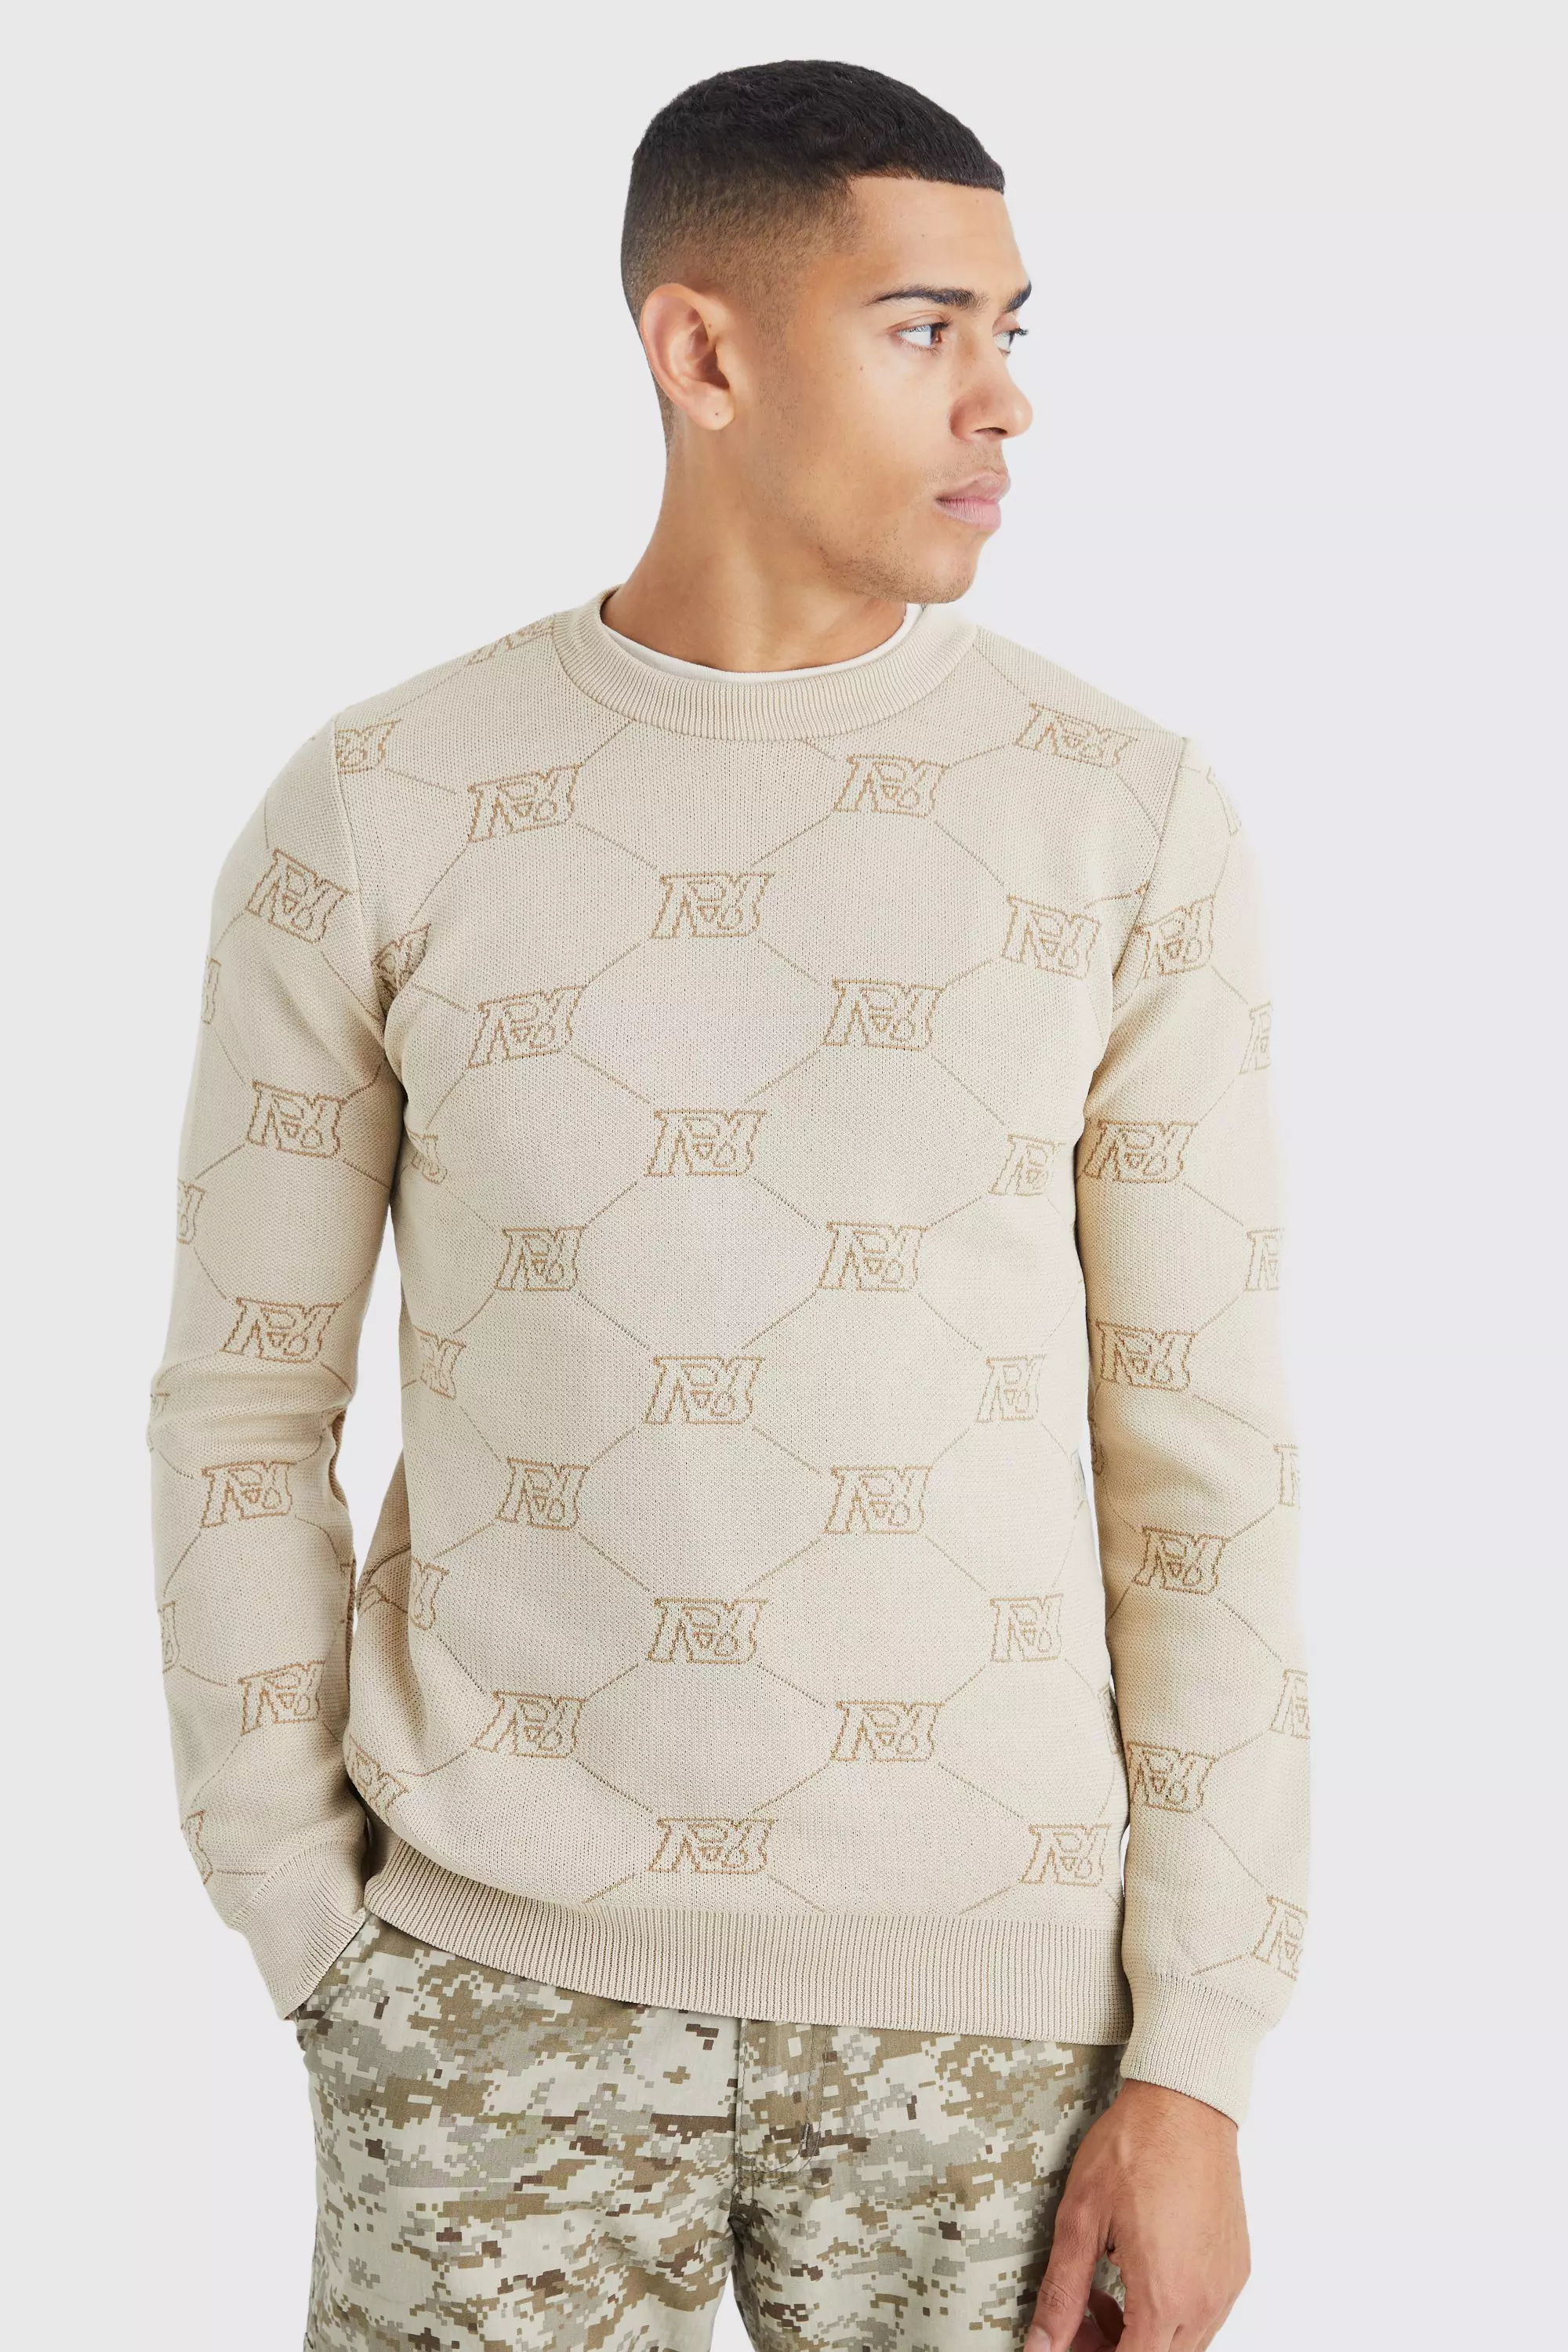 Regular Fit Jacquard Knitted Sweater Stone